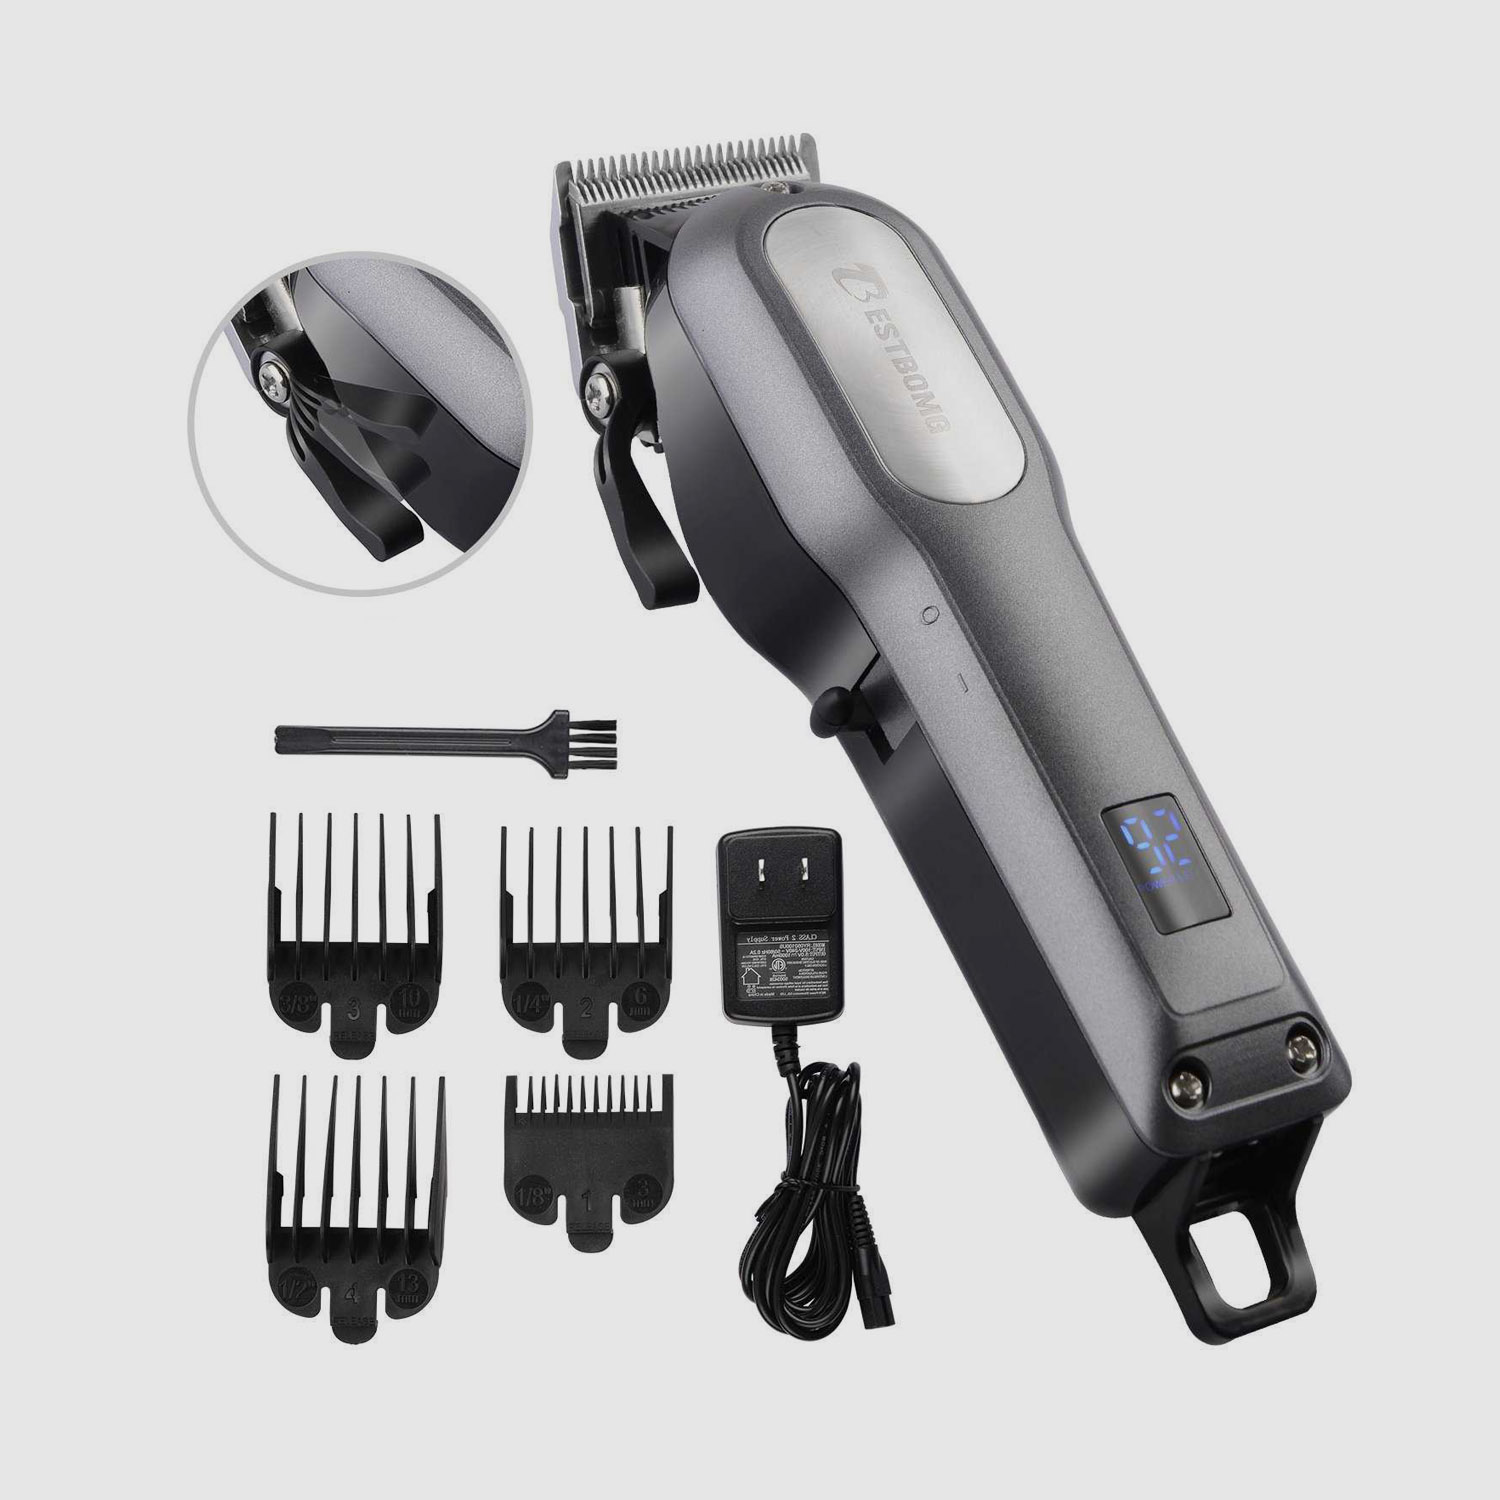 Home Barber Hair Trimmer with Precision Blades Heavy Duty Motor LED Display